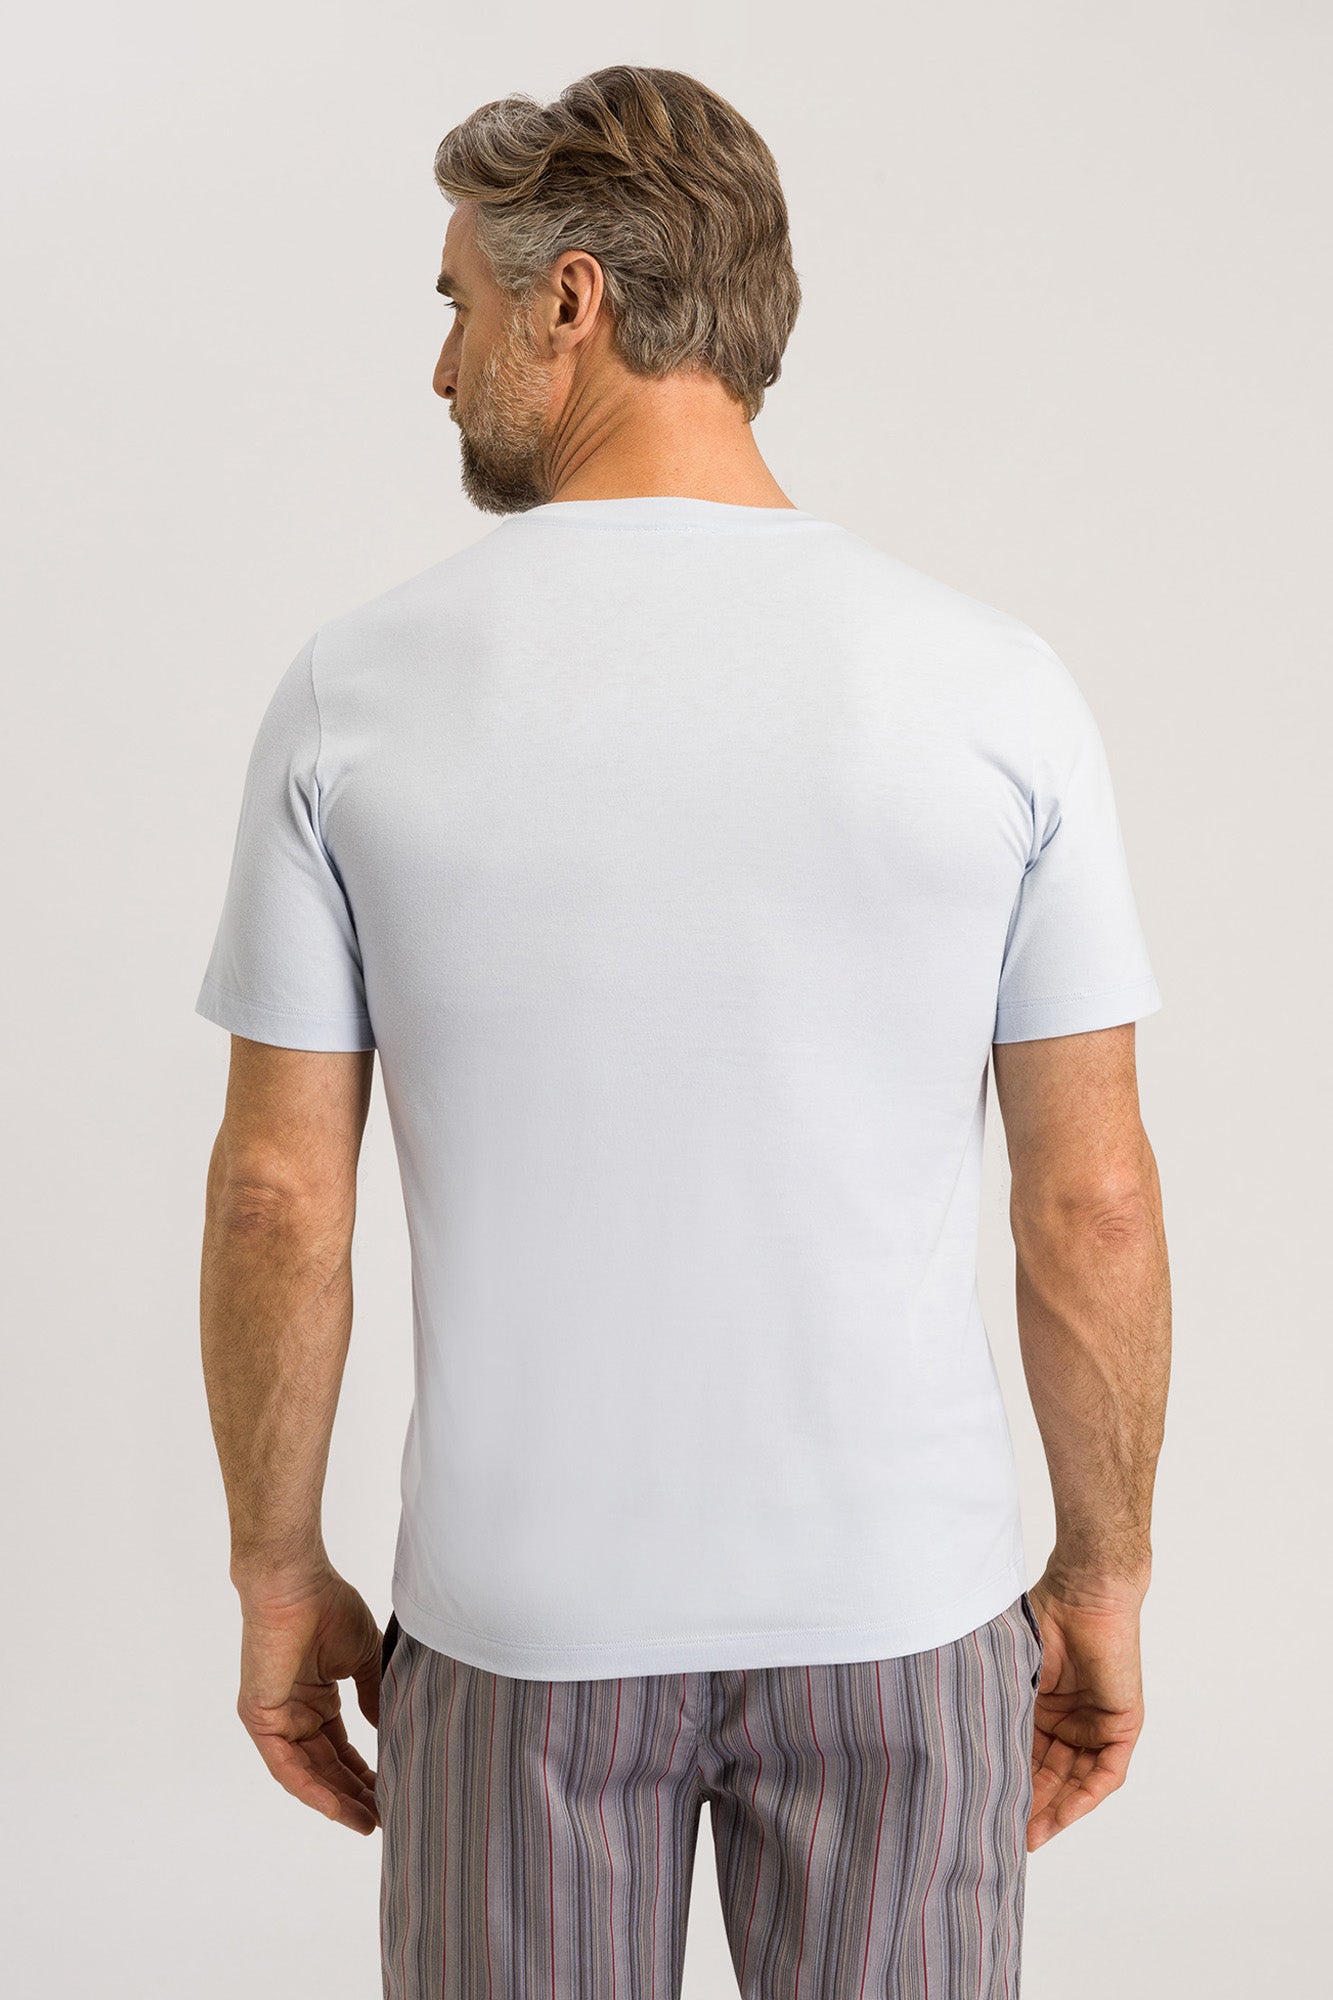 The Short Sleeve Living Shirt By HANRO In Mist